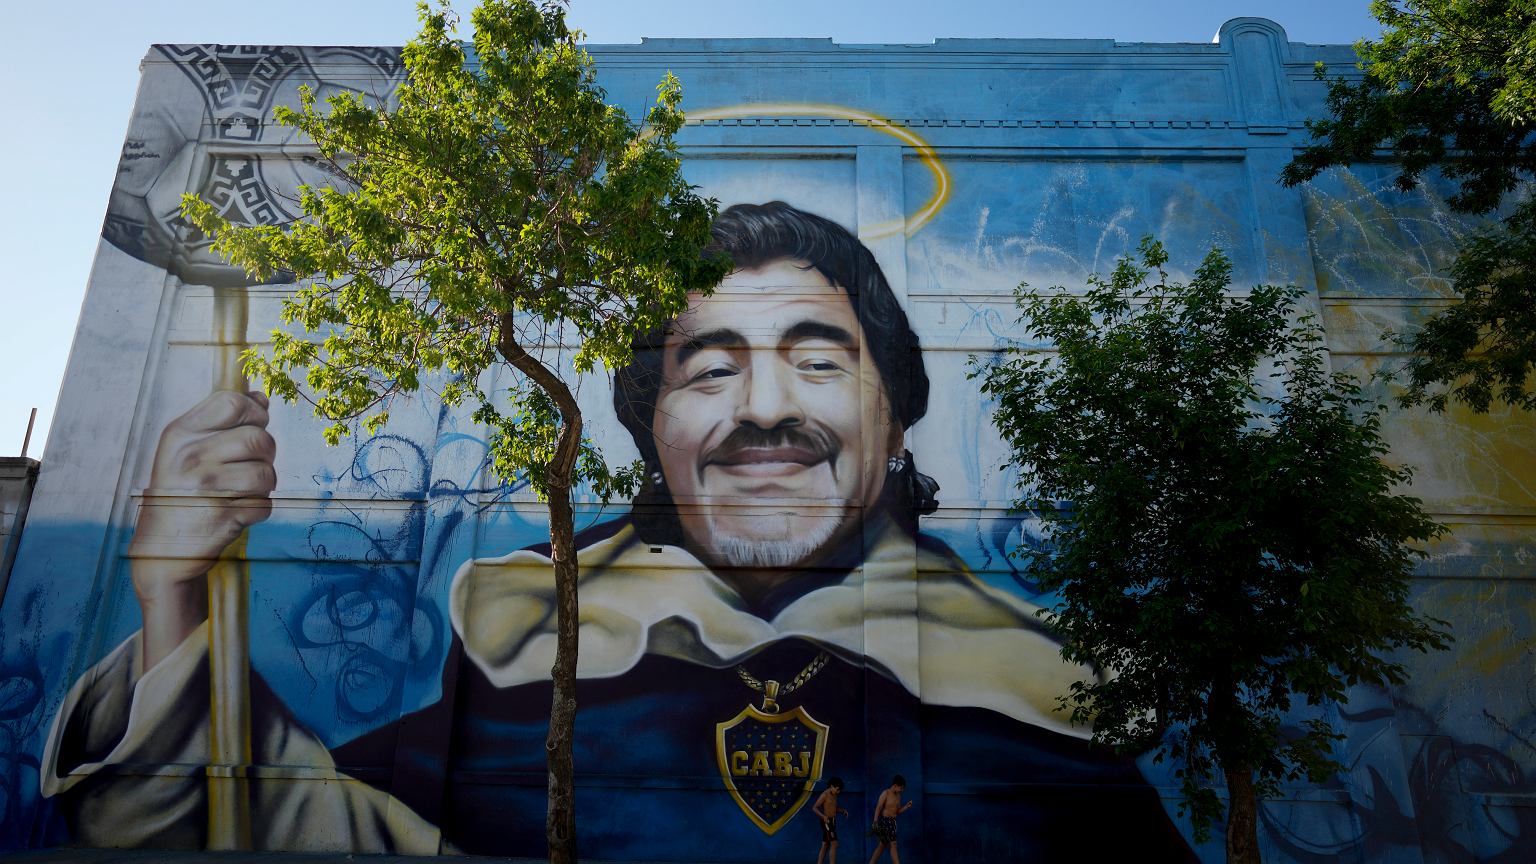 Protests in Buenos Aires after the death of Diego Maradona